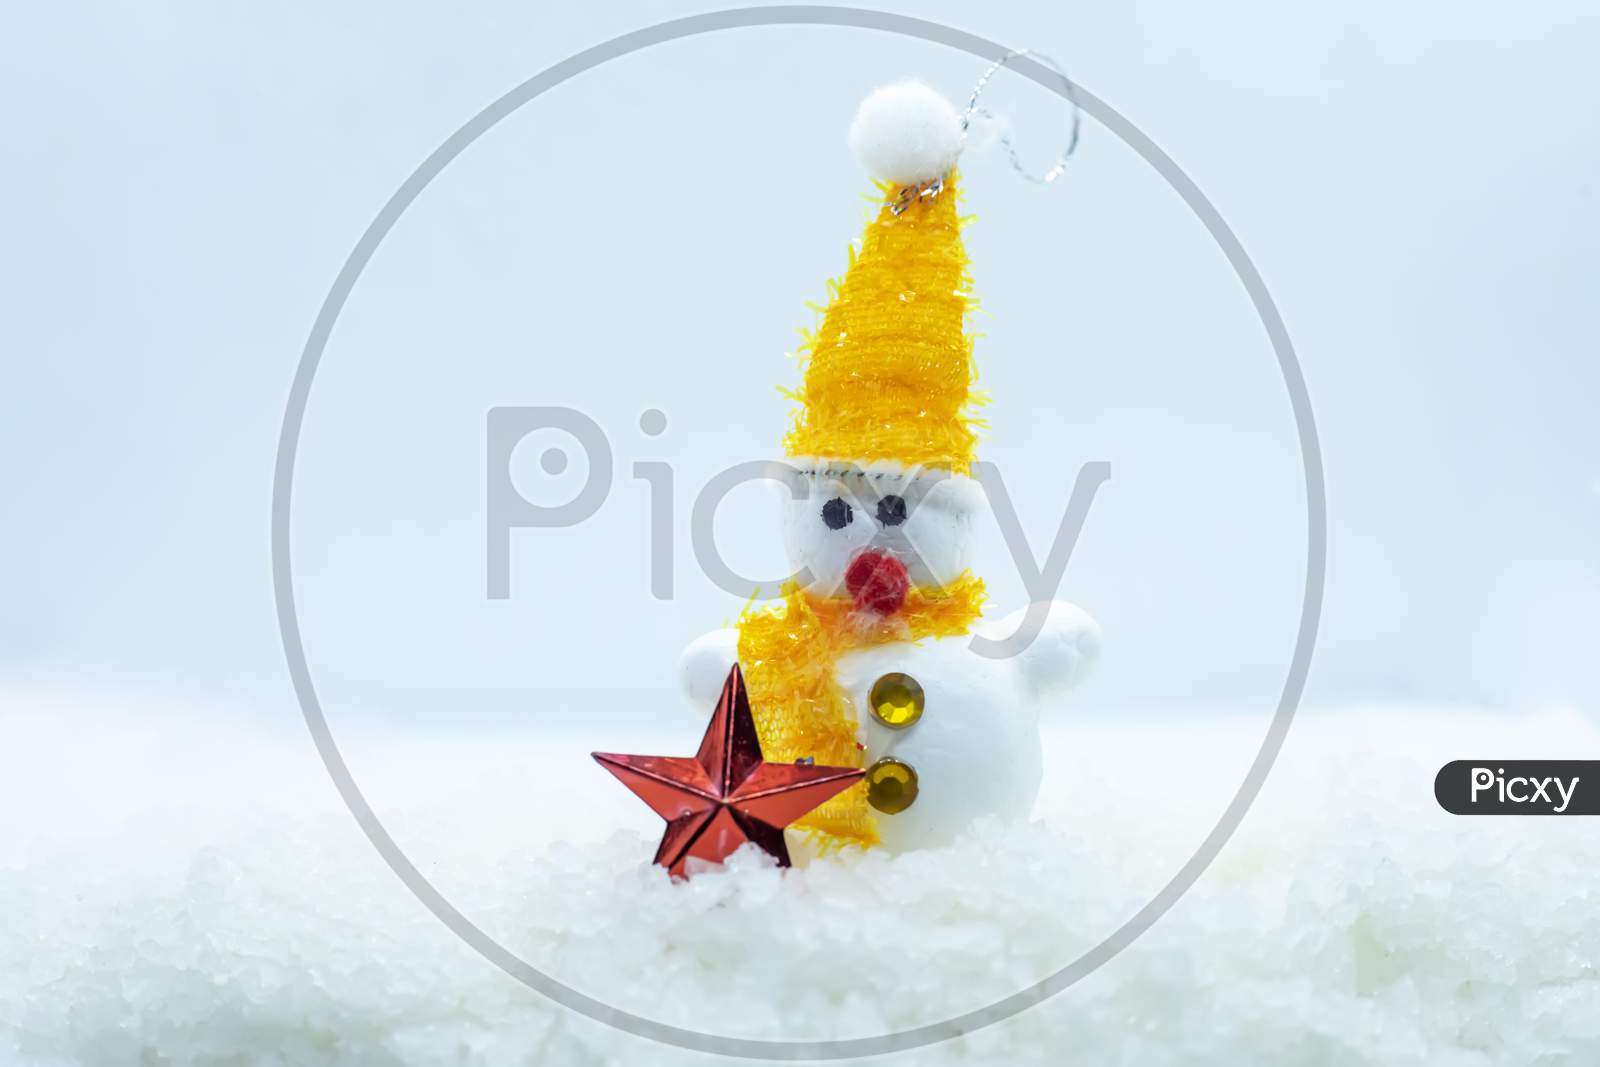 Merry Christmas And Happy New Year Greeting Card . Happy Snowman Standing In Winter Christmas Landscape.